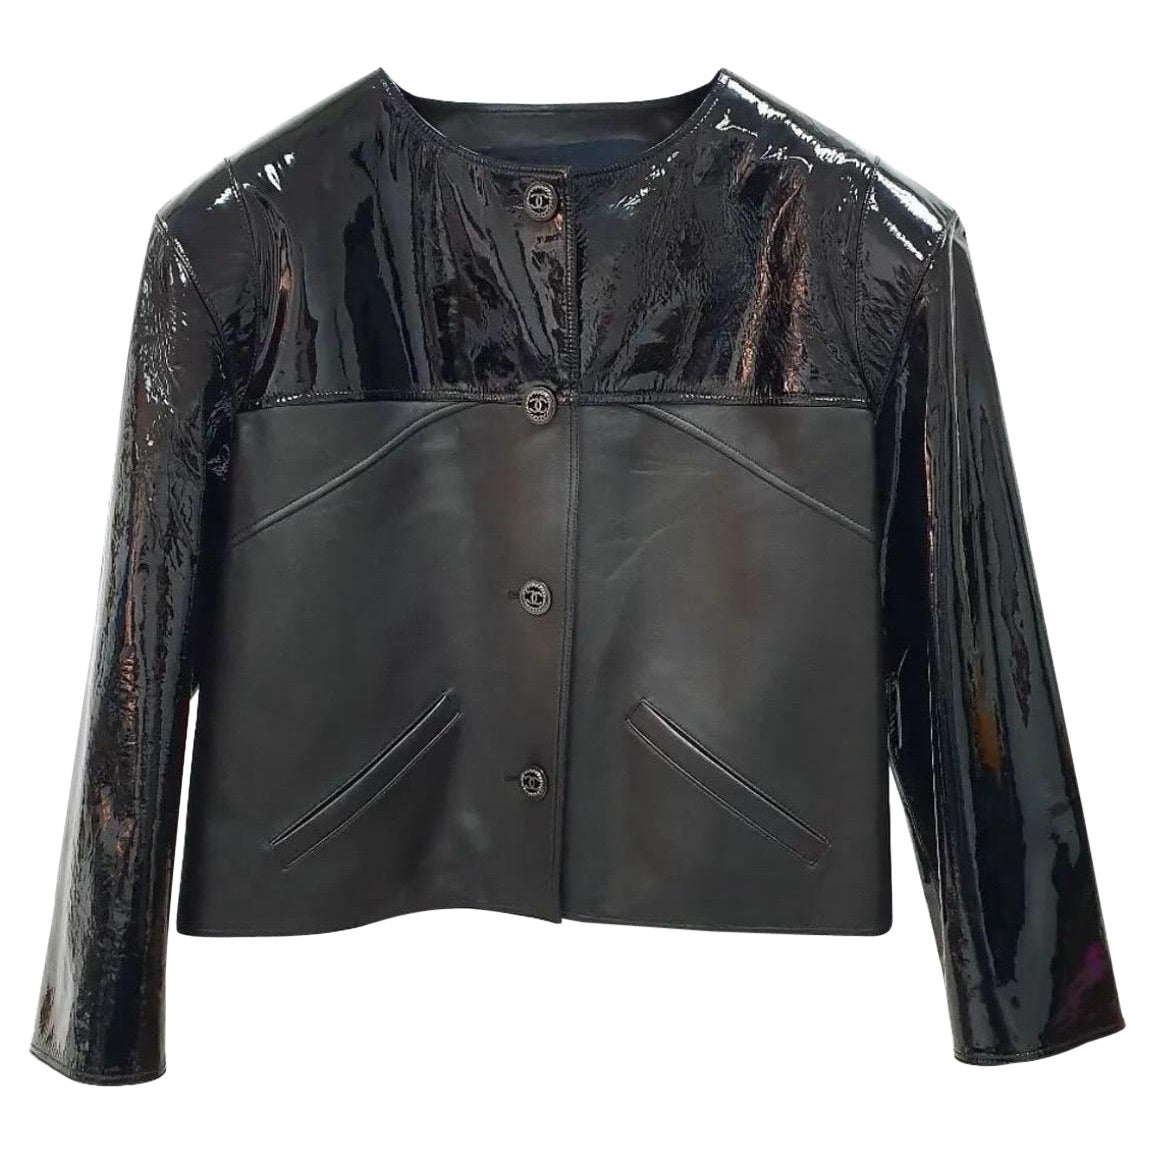 Chanel Black Leather Patent Leather Jacket